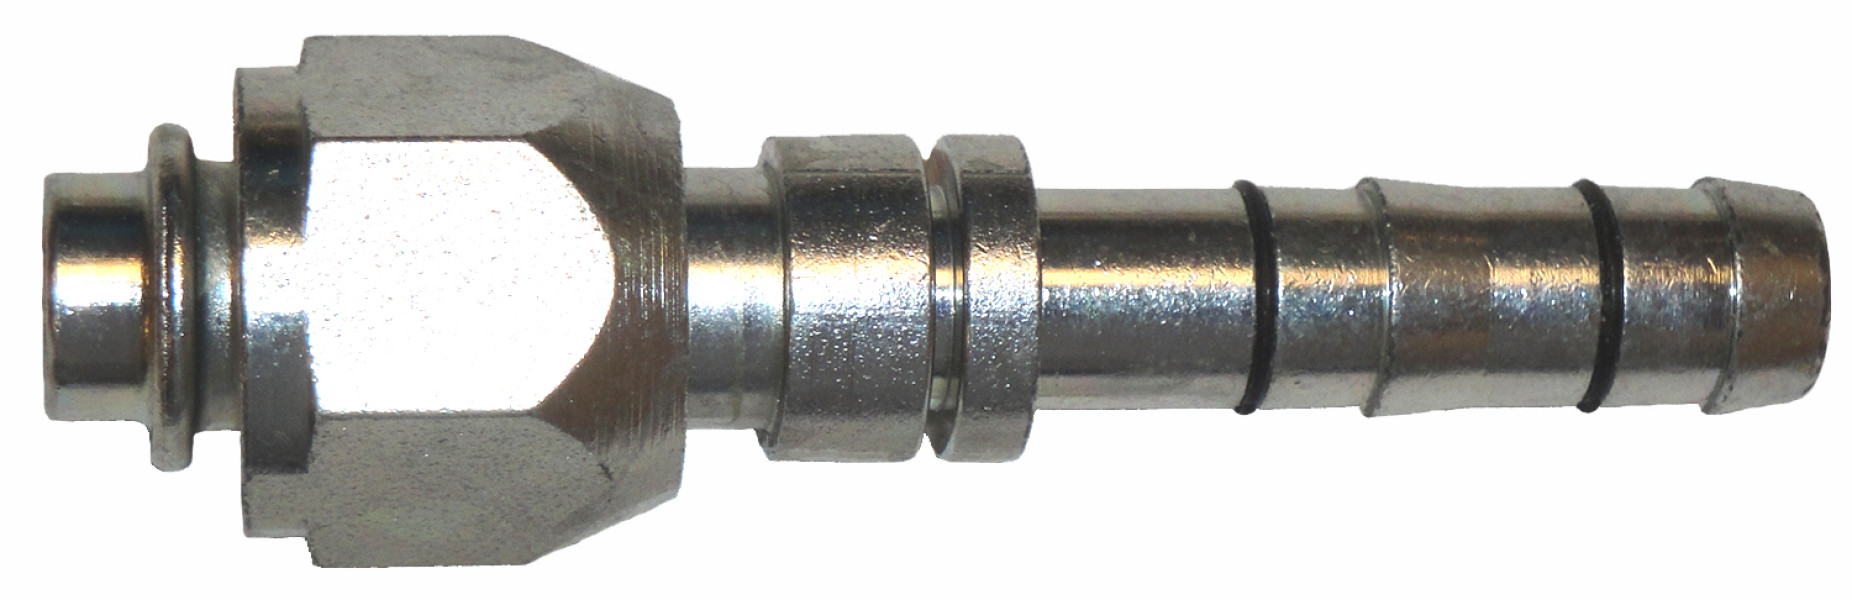 Image of A/C Refrigerant Hose Fitting from Sunair. Part number: FF14178